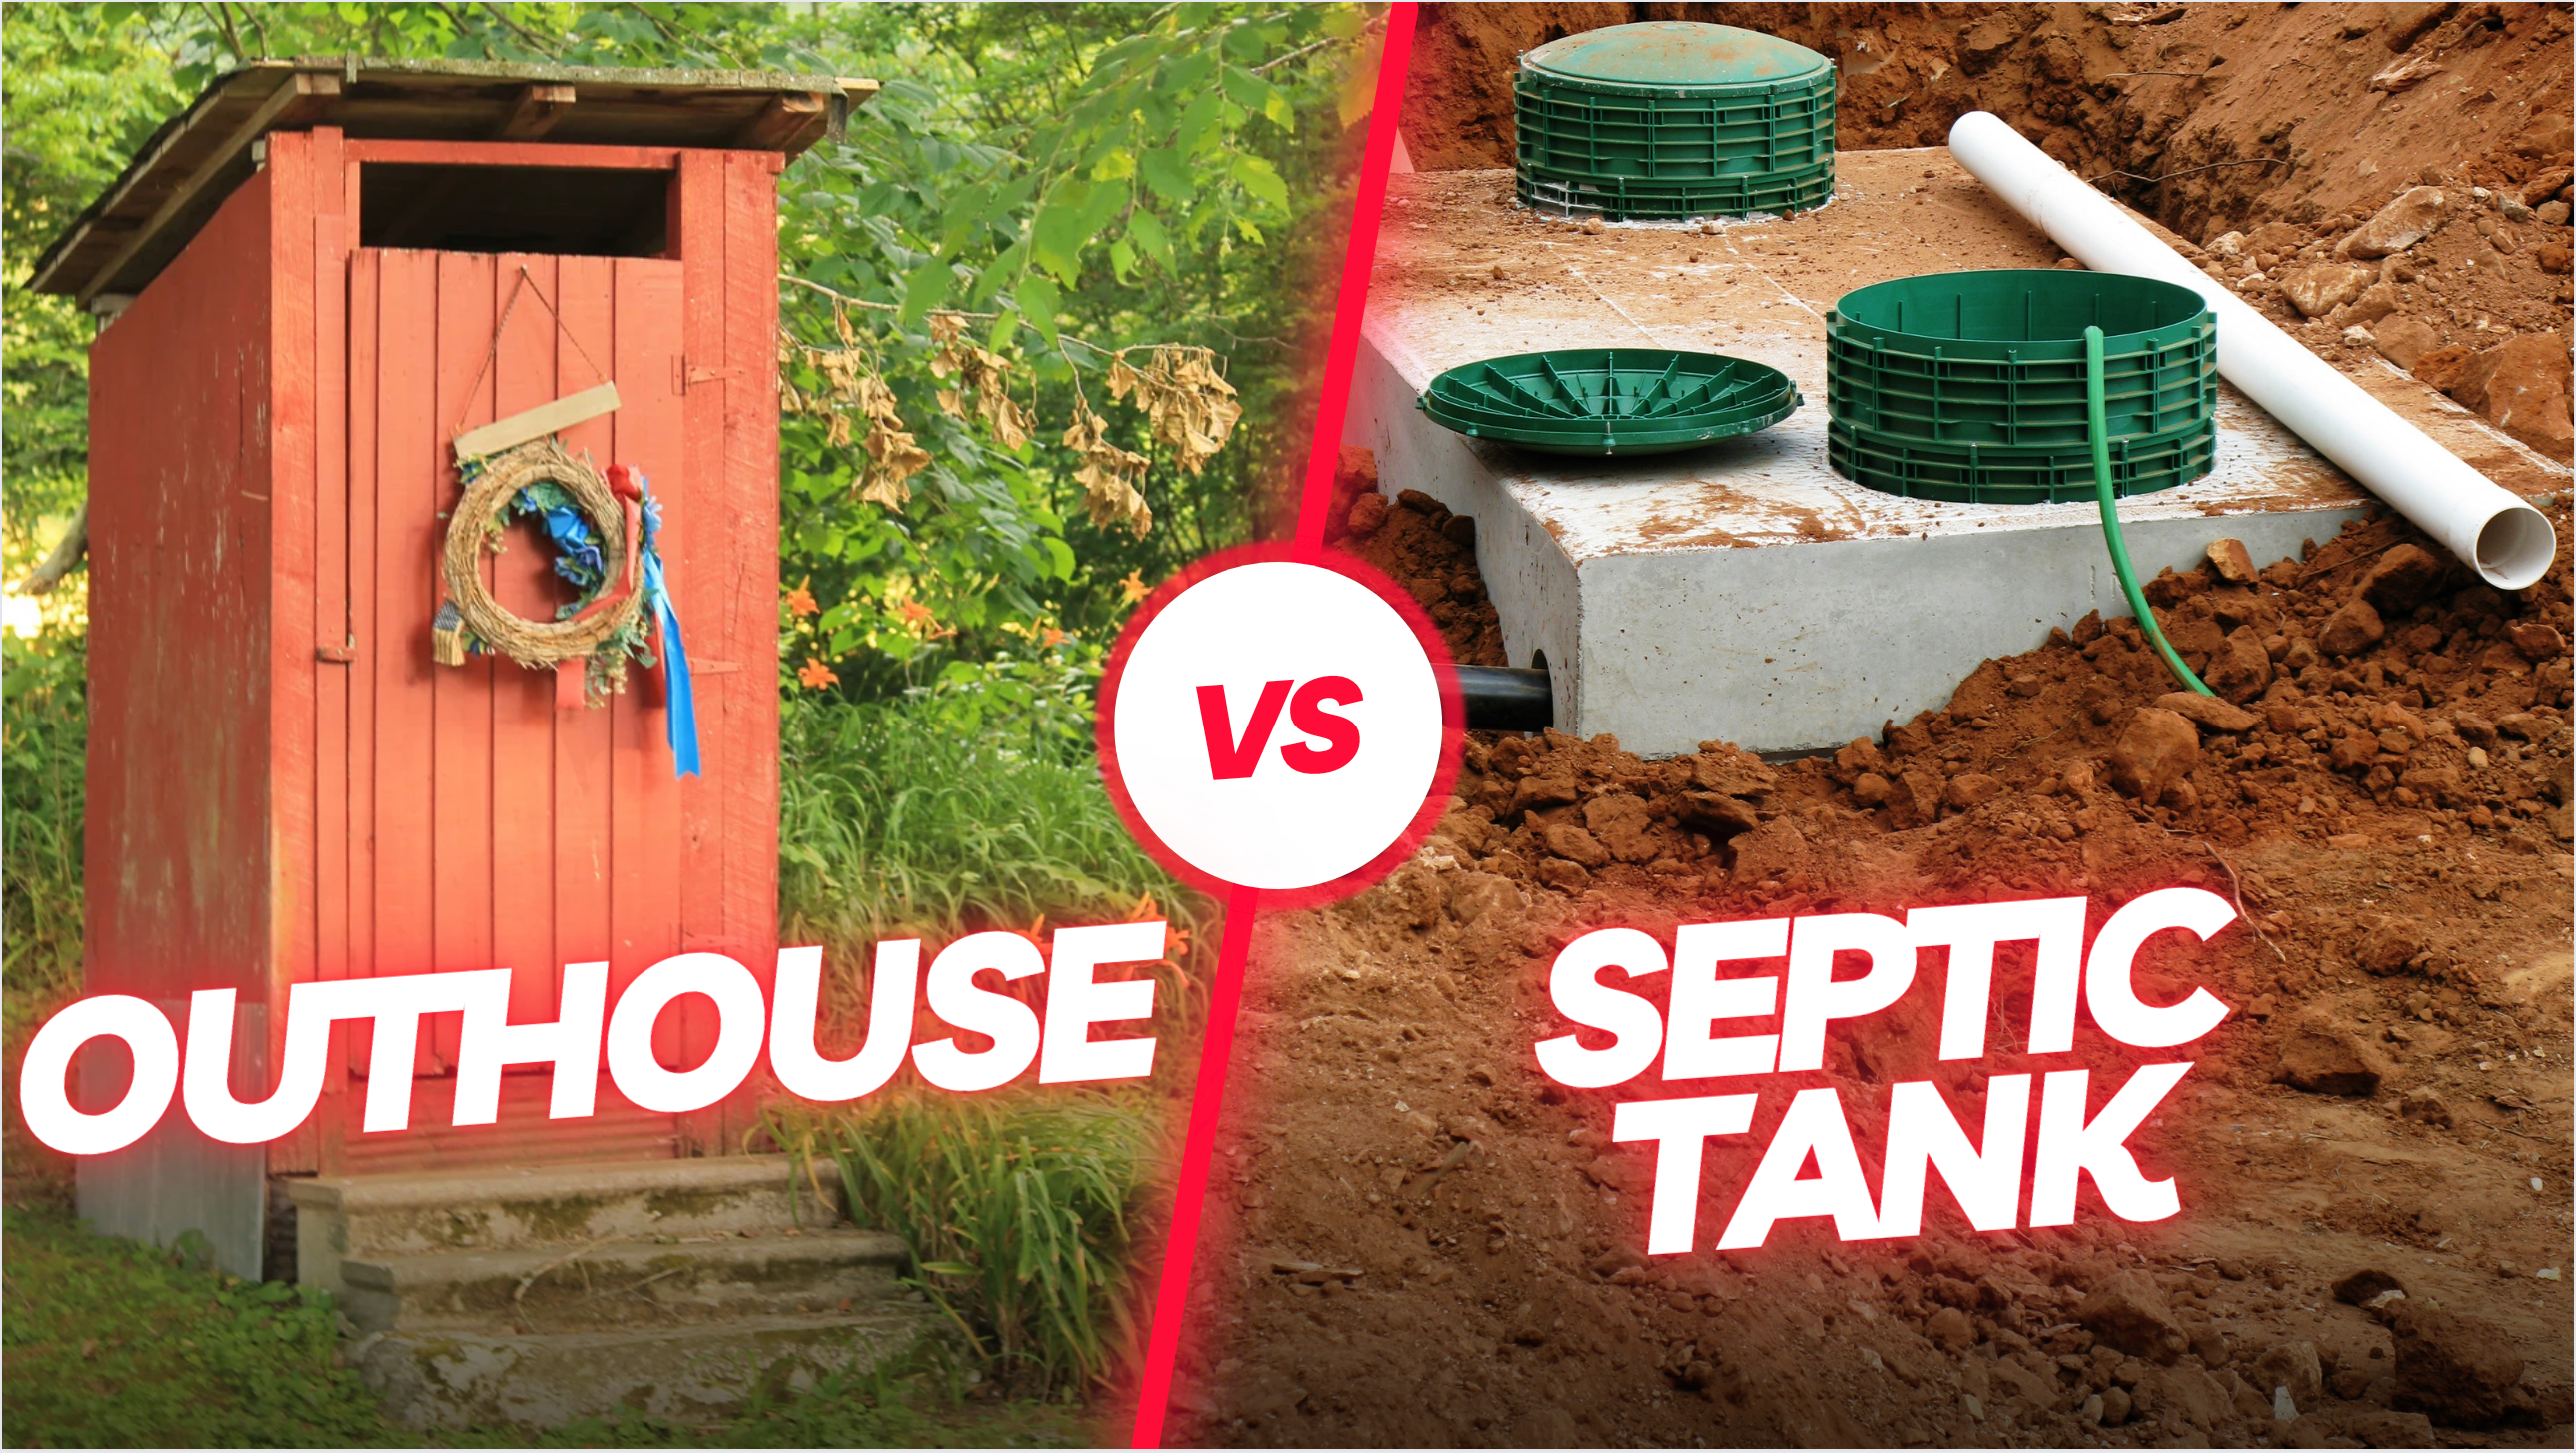 What is the Difference Between Septic Tanks and Outhouses?